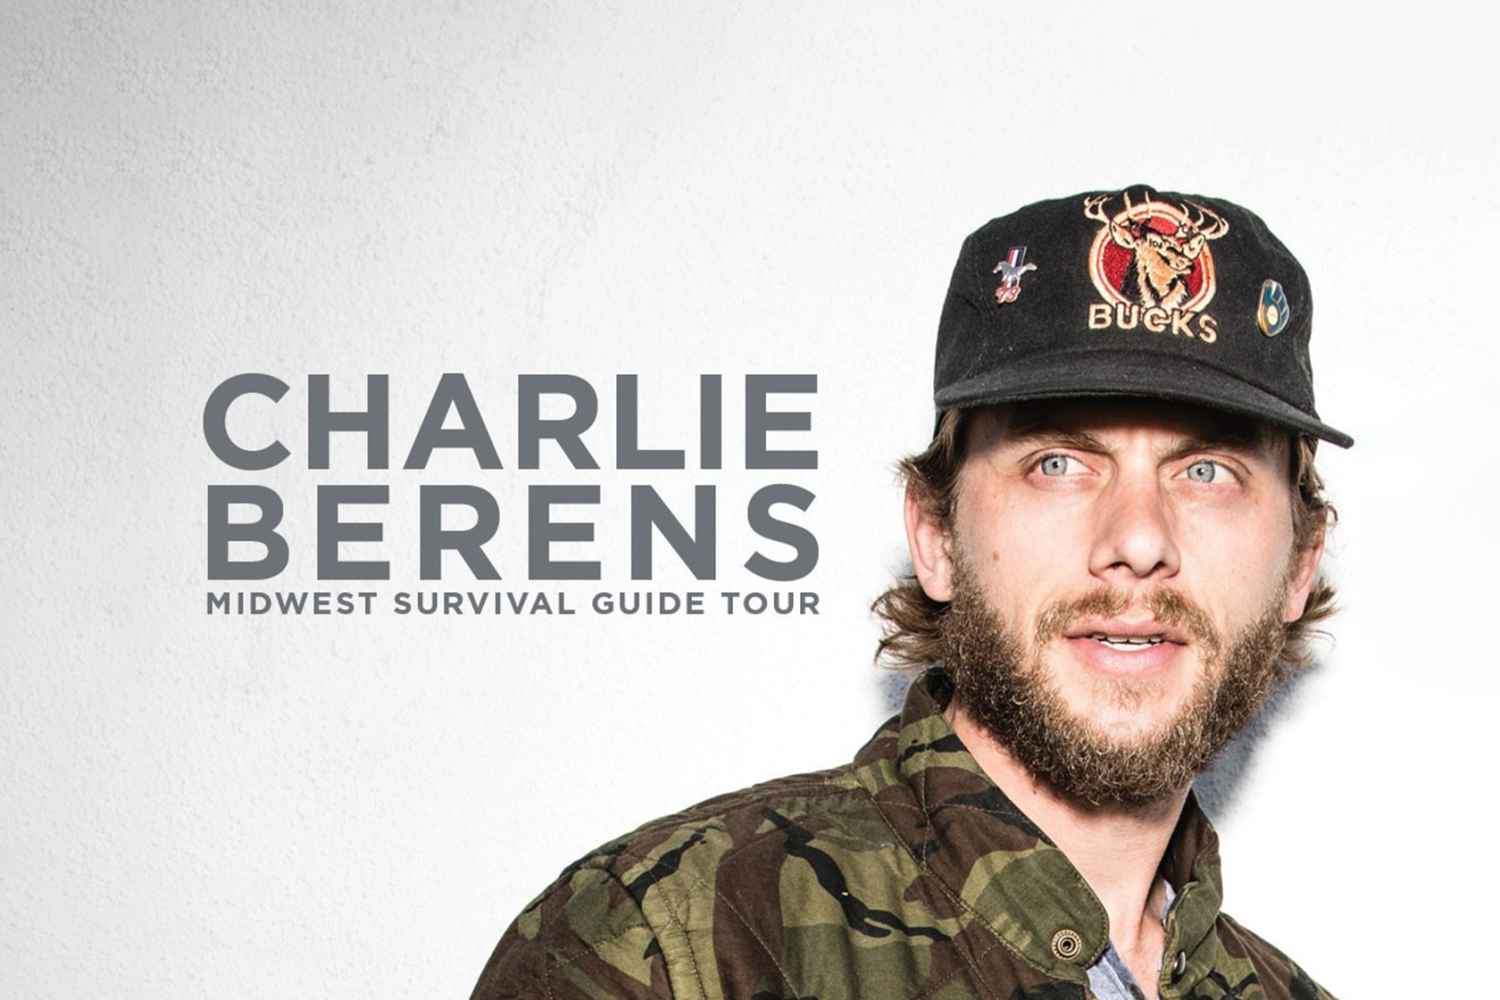 The Midwest Survival Guide by Charlie Berens